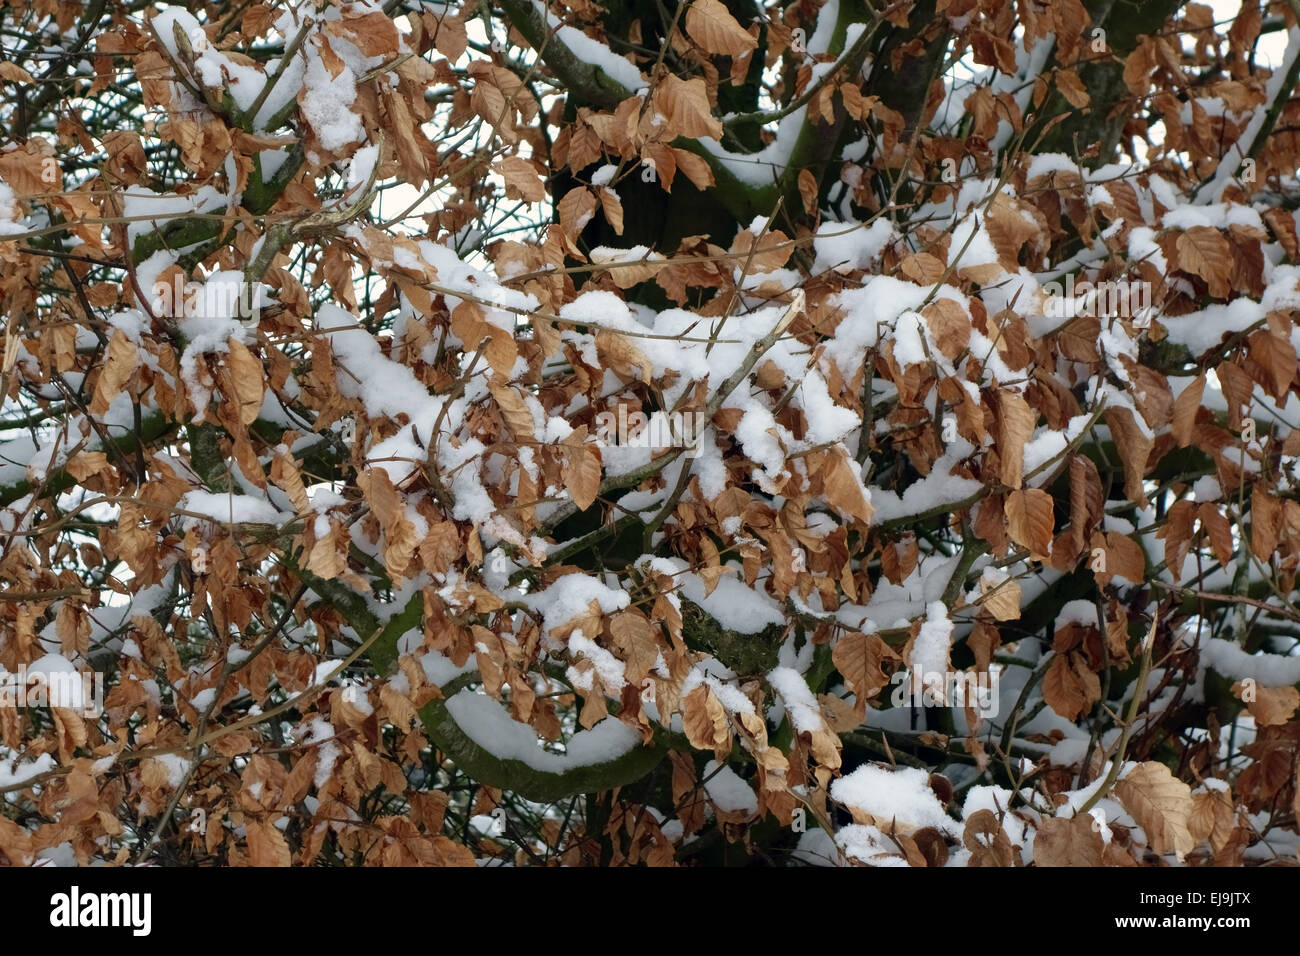 Freshly fallen snow on dry brown leaves of a beech hedge in winter, Berkshire, February Stock Photo